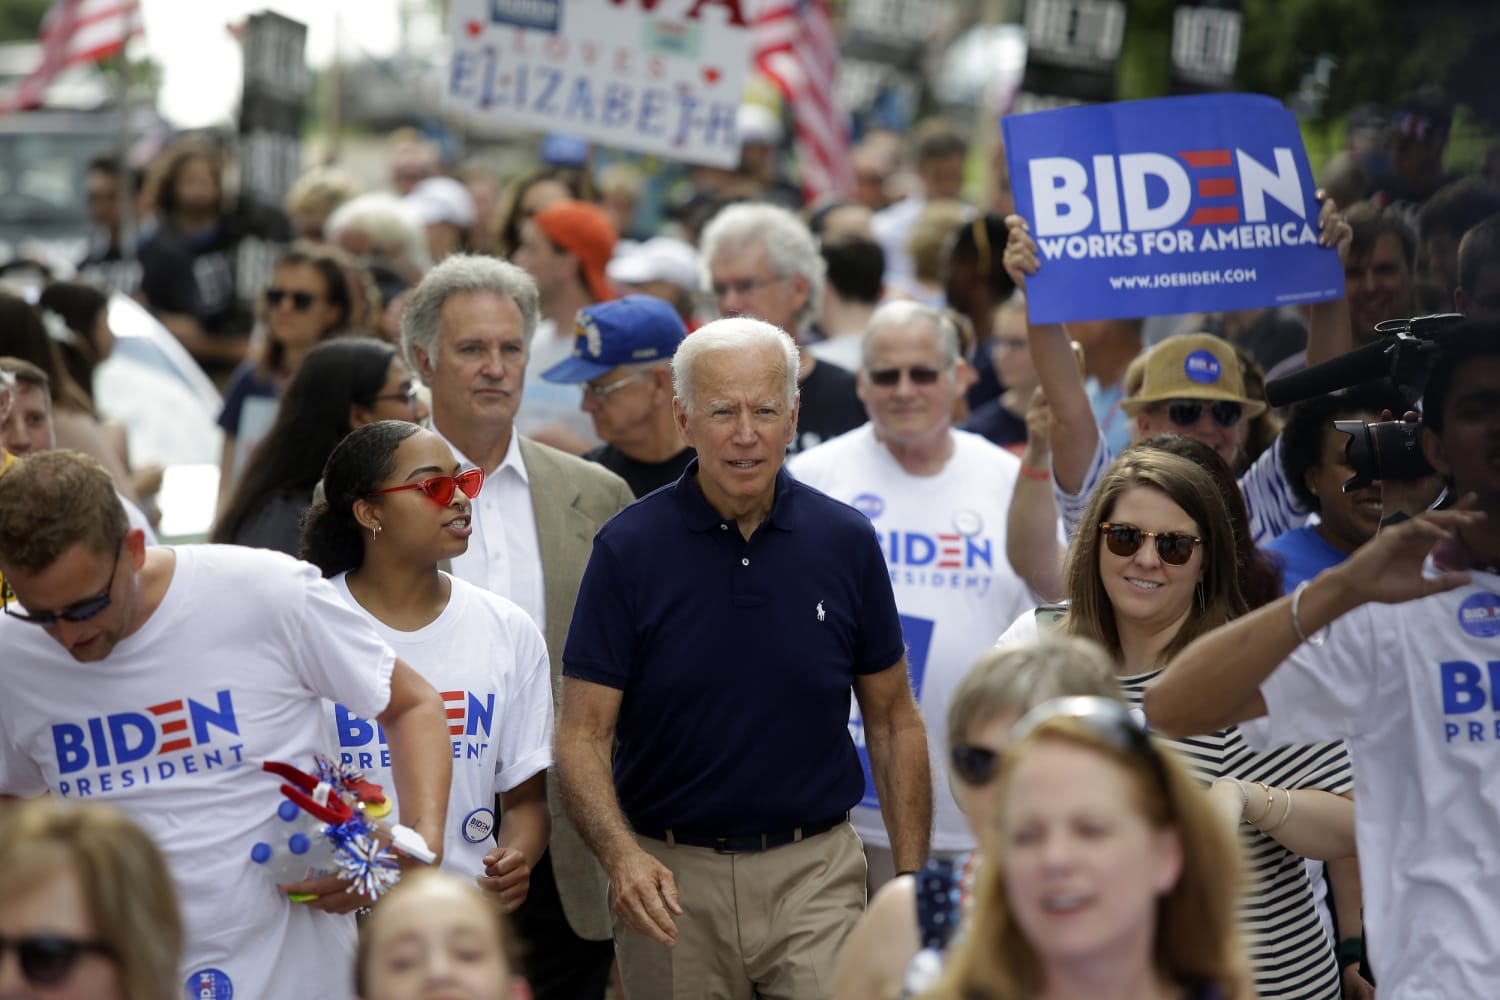 New details revealed about Biden's busing record: Why was he so strongly opposed?